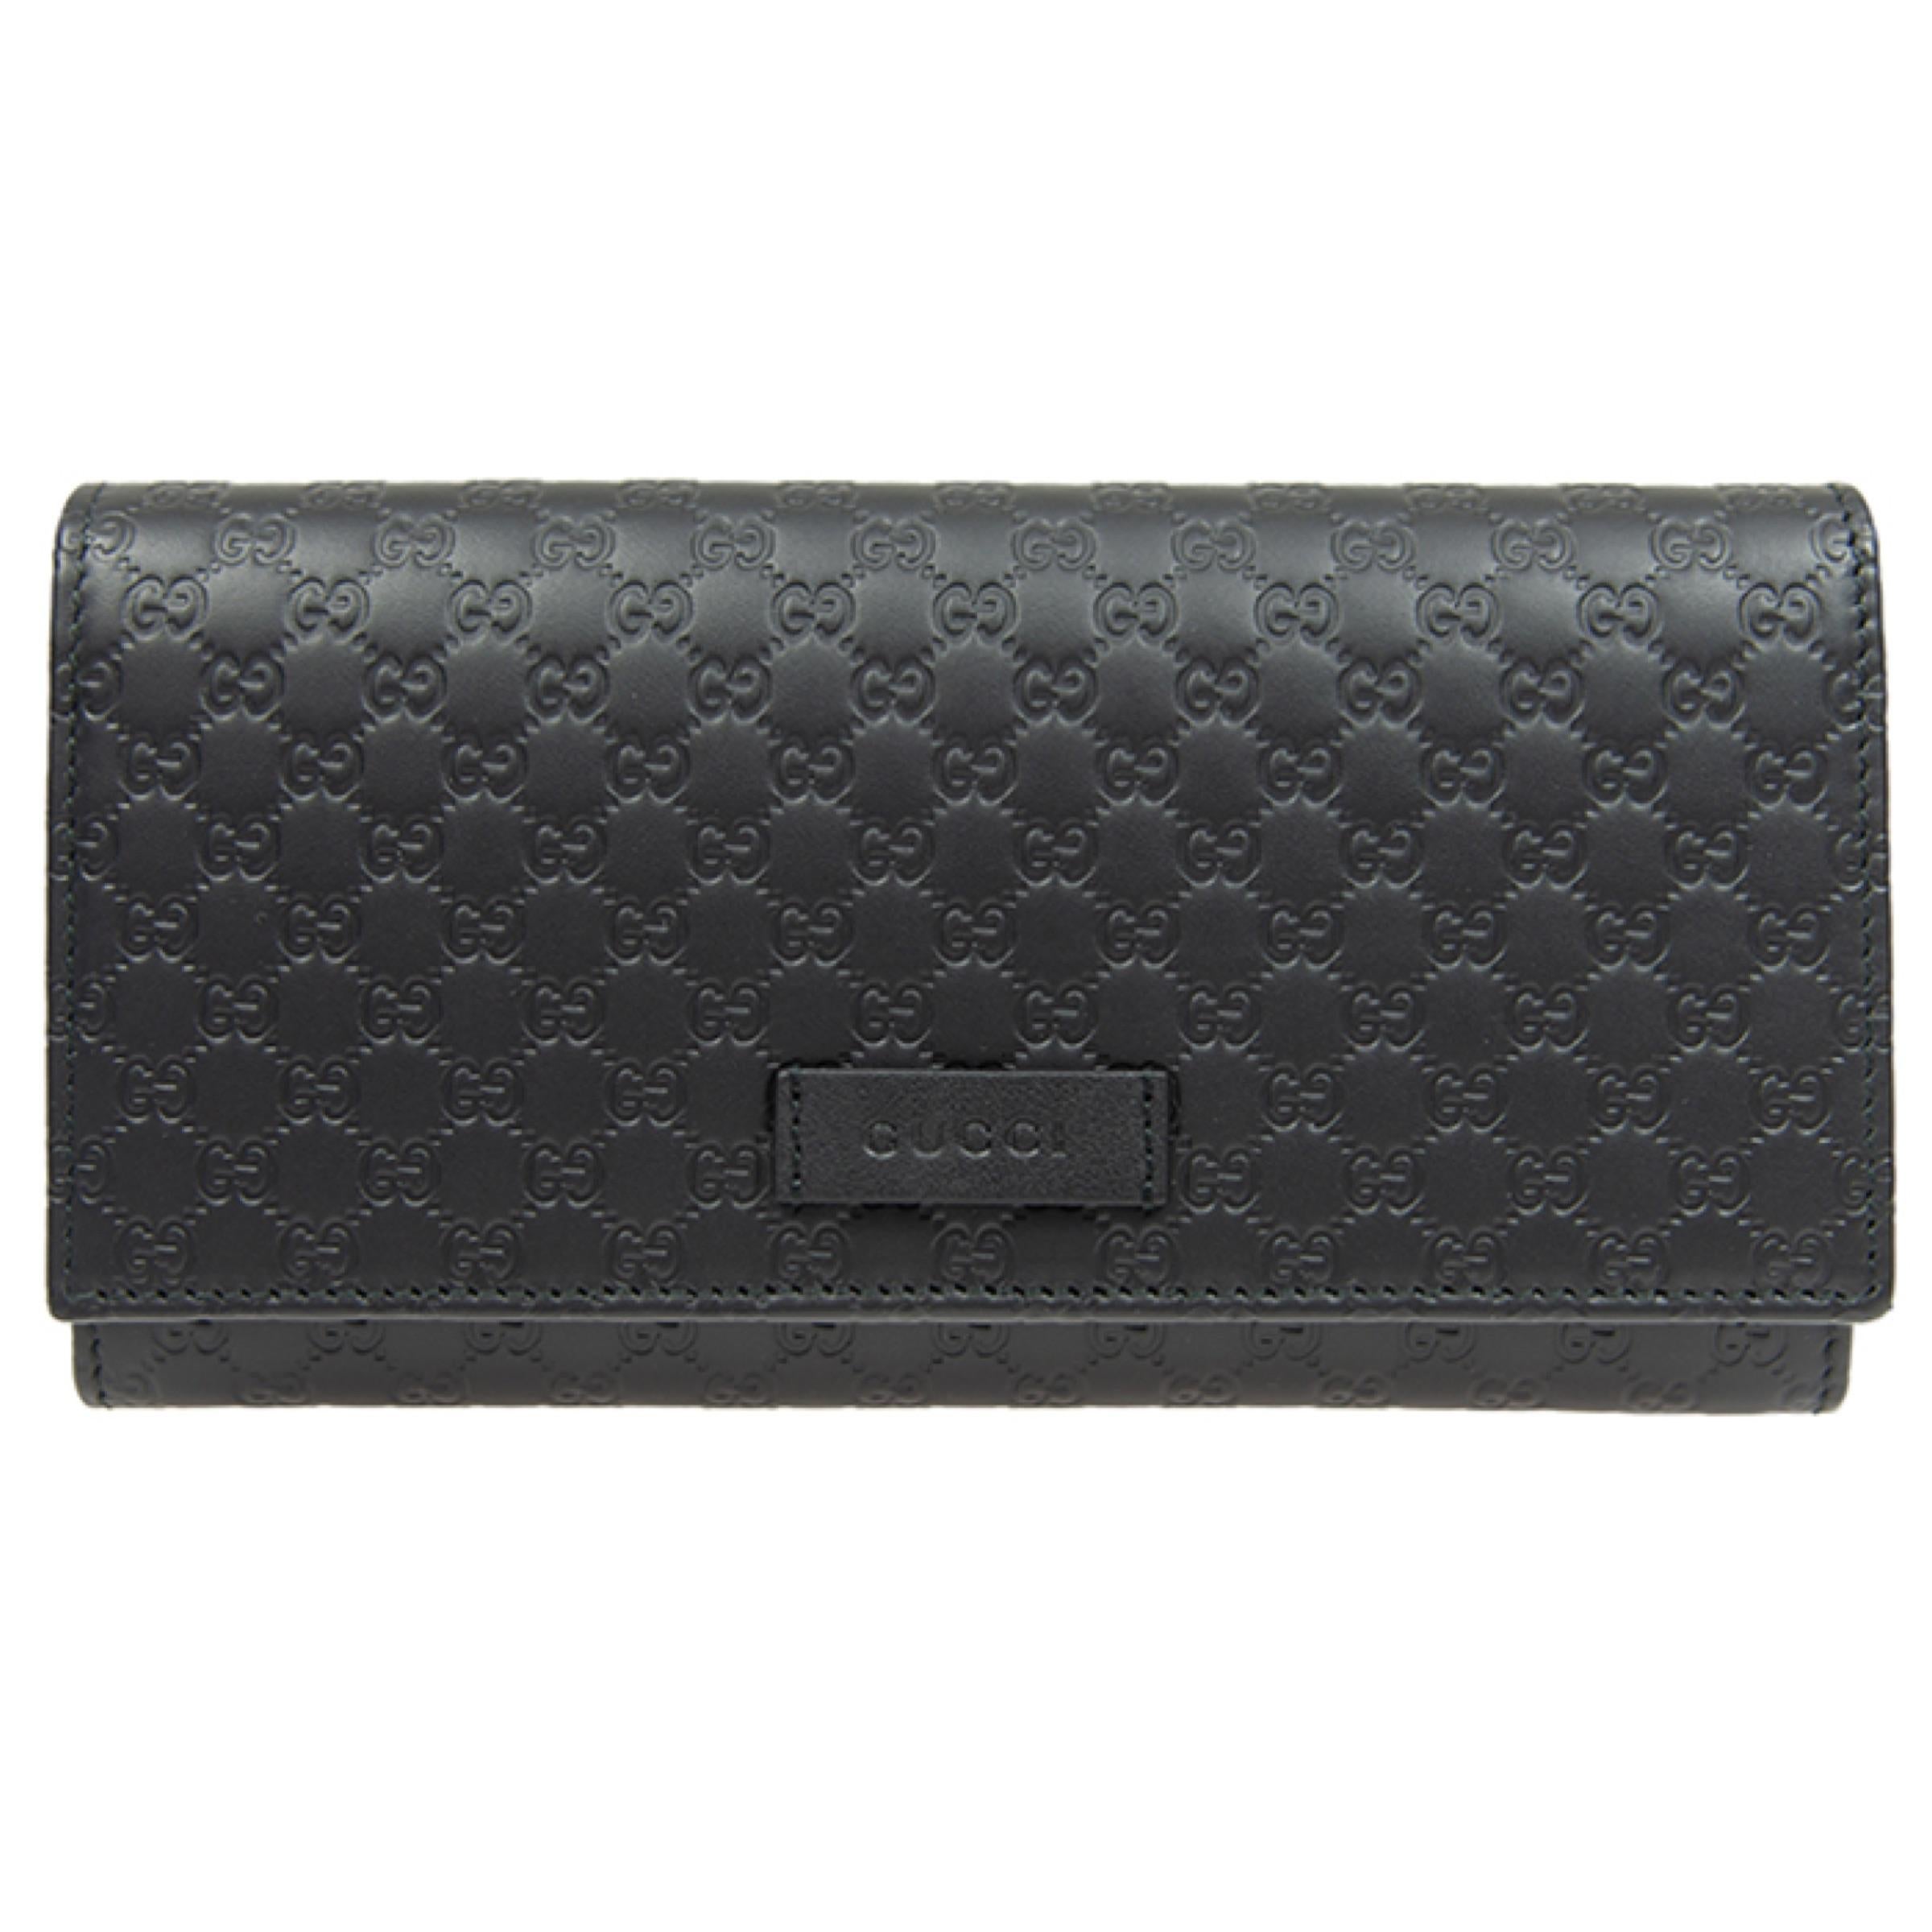 New Gucci Black GG Guccissima Monogram Leather Long Wallet Clutch Bag

Authenticity Guaranteed

DETAILS
Brand: Gucci
Condition: Brand new
Gender: Unisex
Category: Clutch
Color: Black
Material: Leather
Monogram GG guccissima
Snap button closure
2